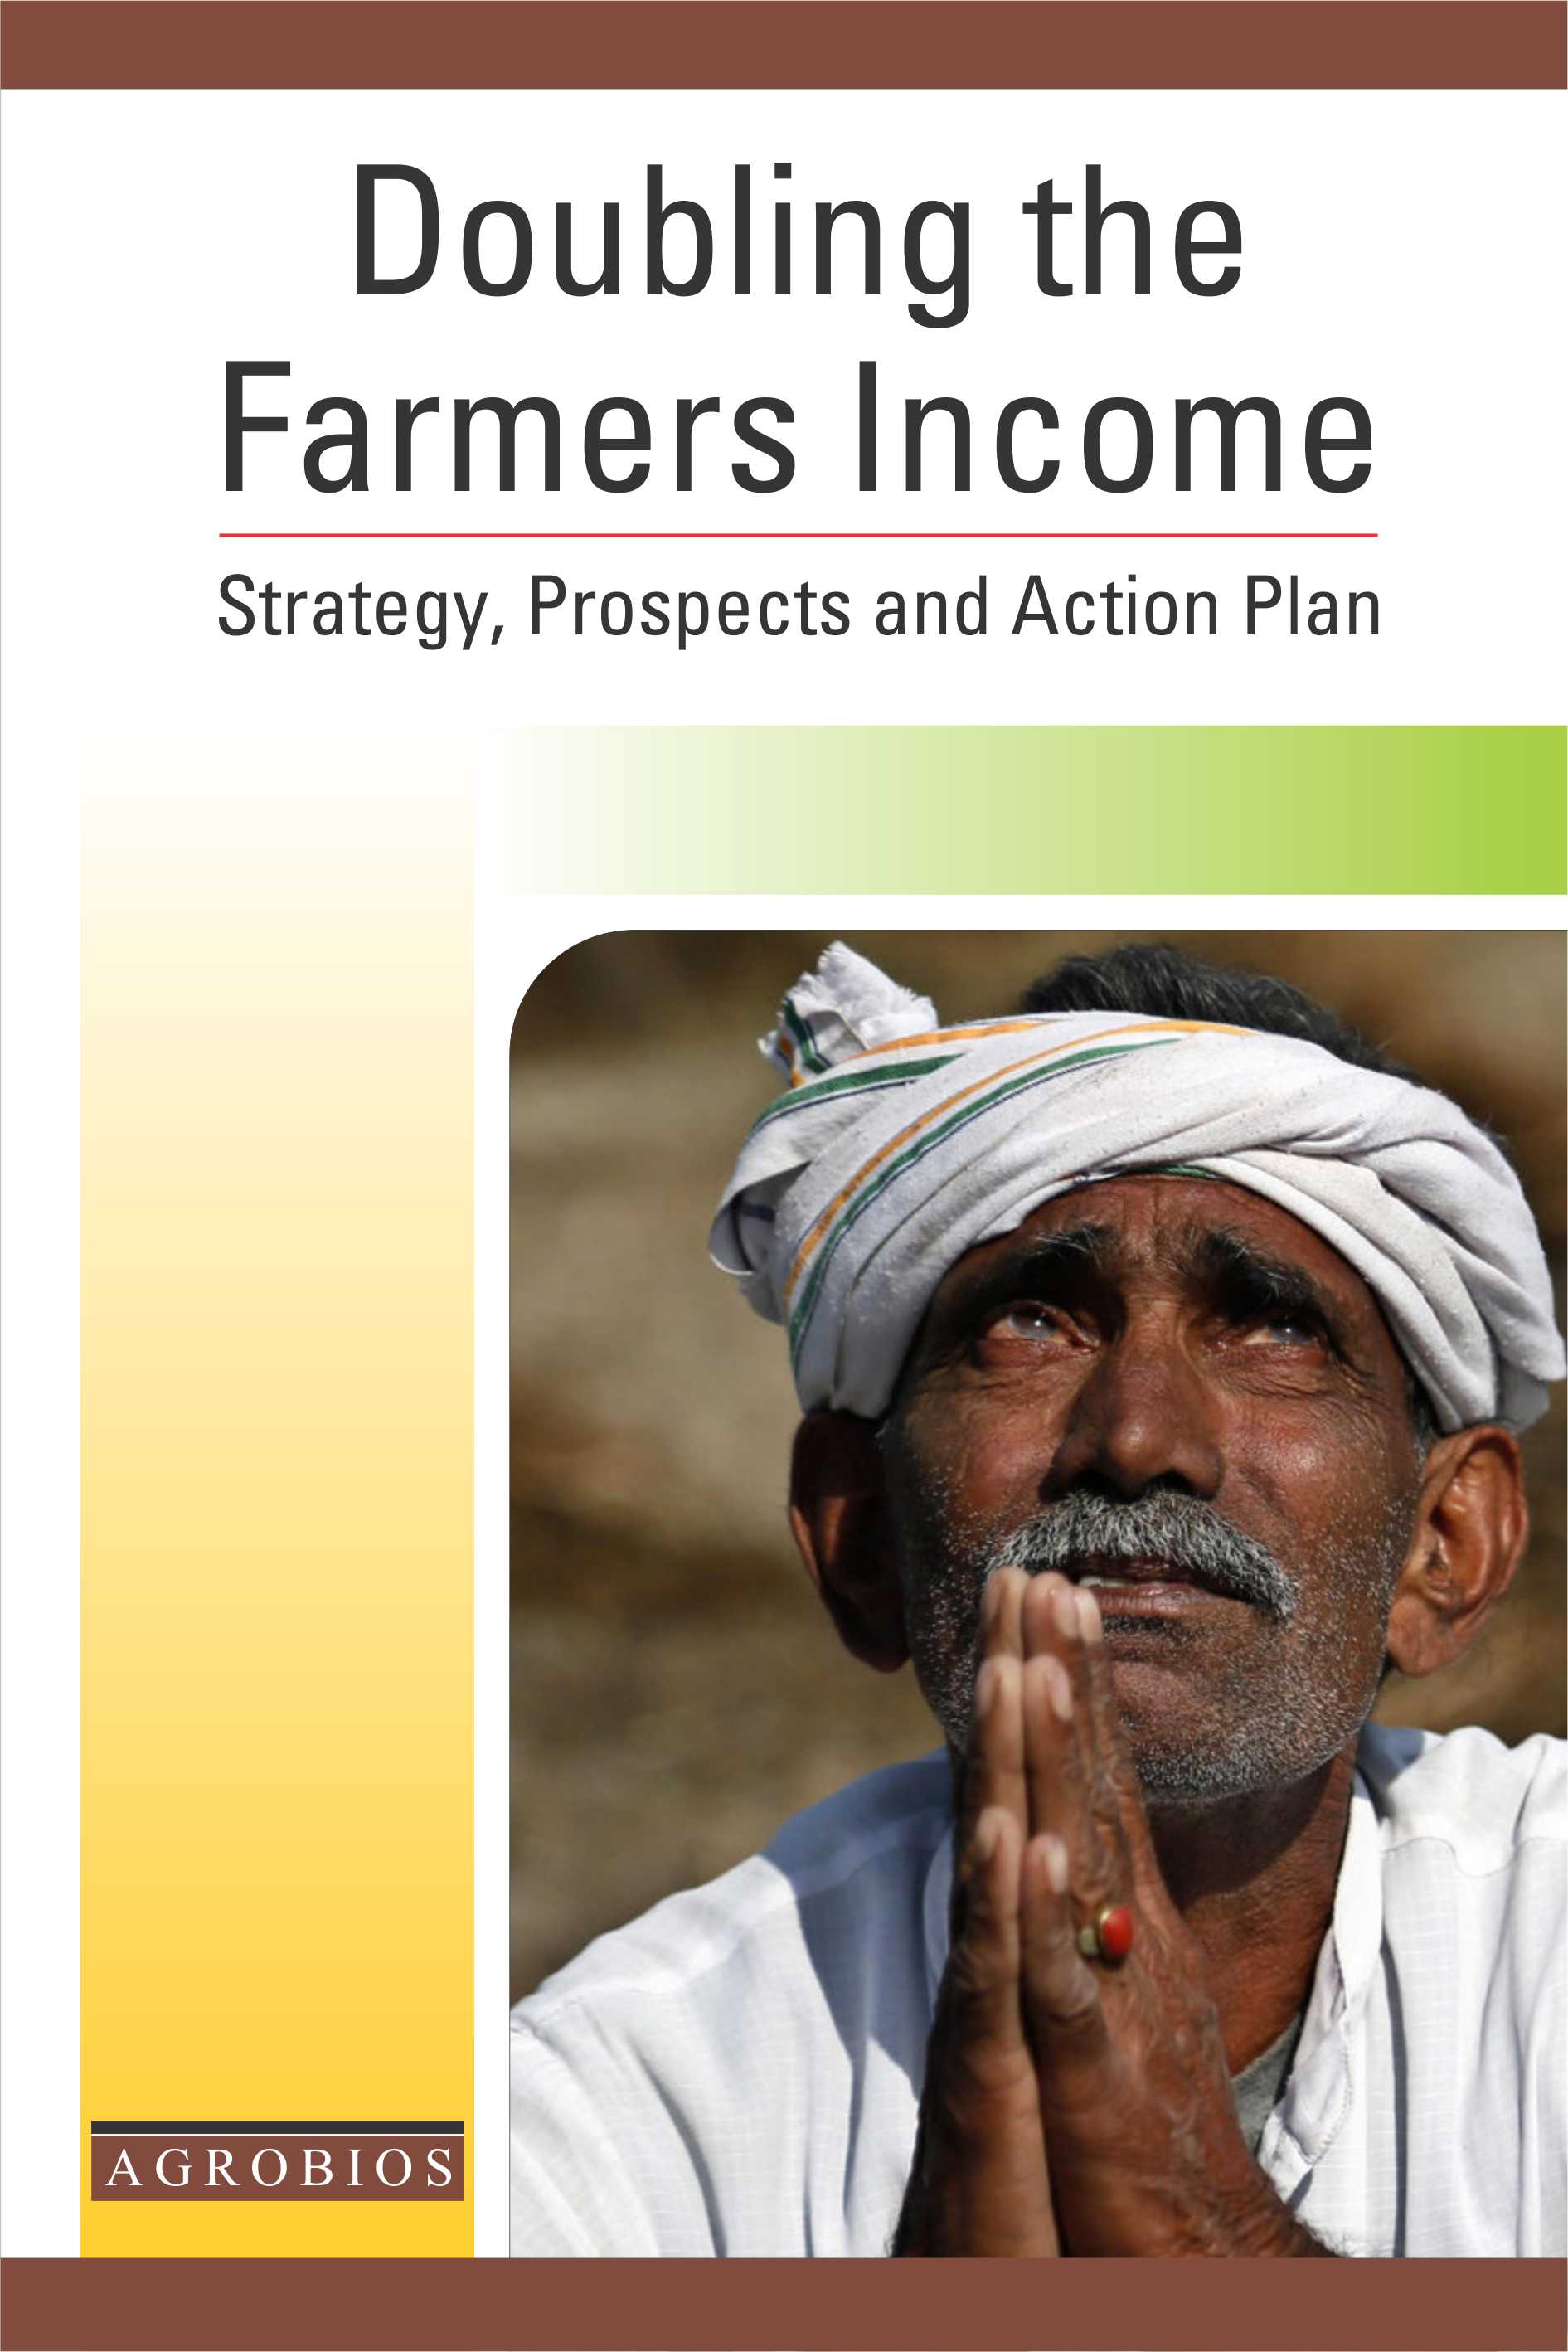 Doubling the Farmers Income